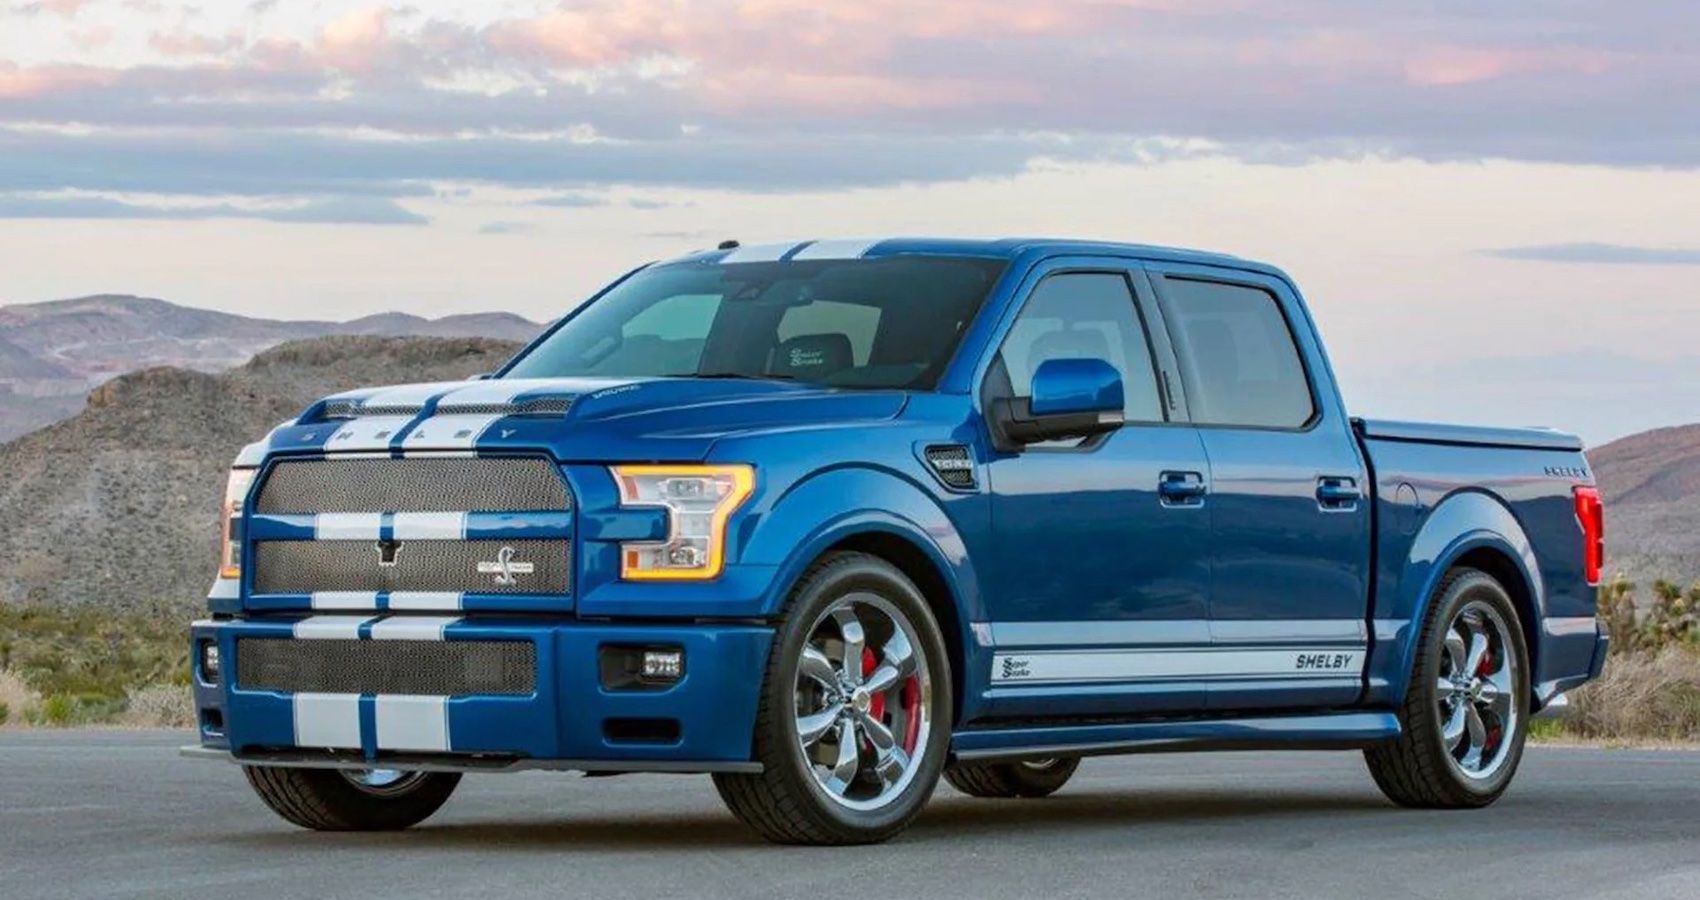  2017 Ford Shelby F-150 Super Snake 